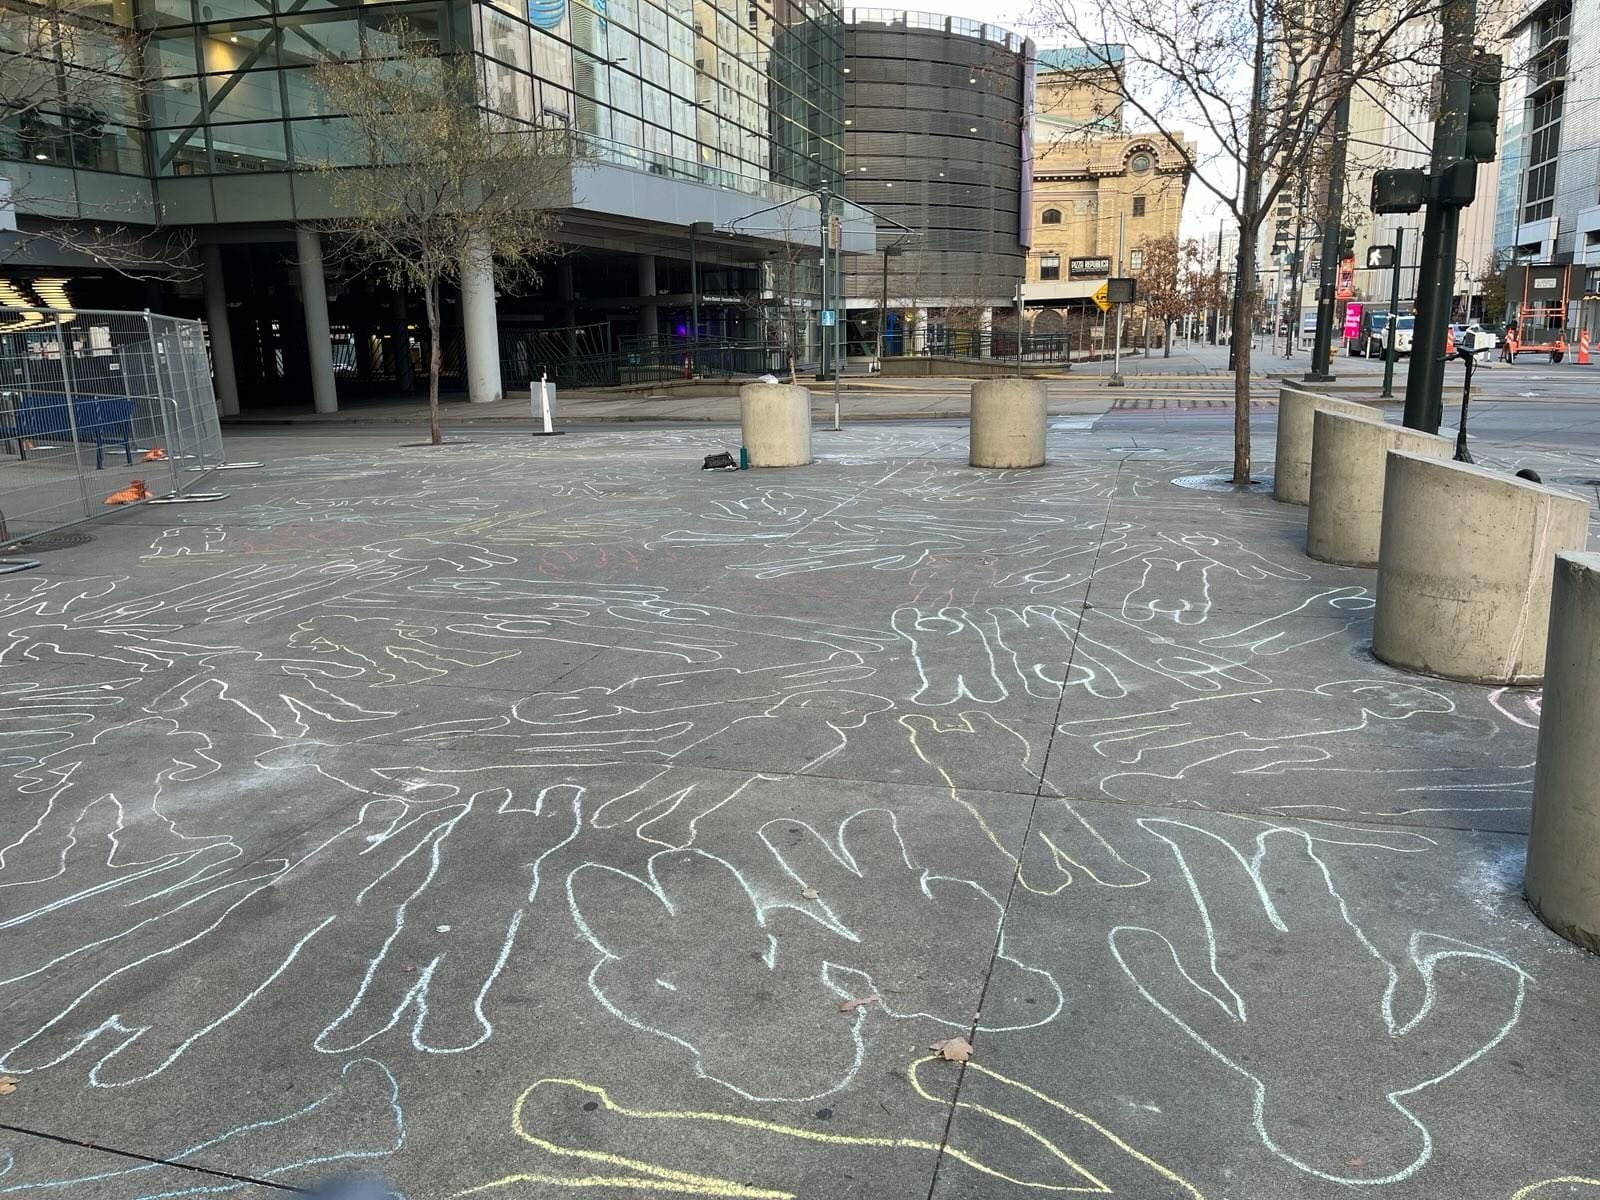 Dozens of chalk outlines of children cover the sidewalk in front of Denver's convention center